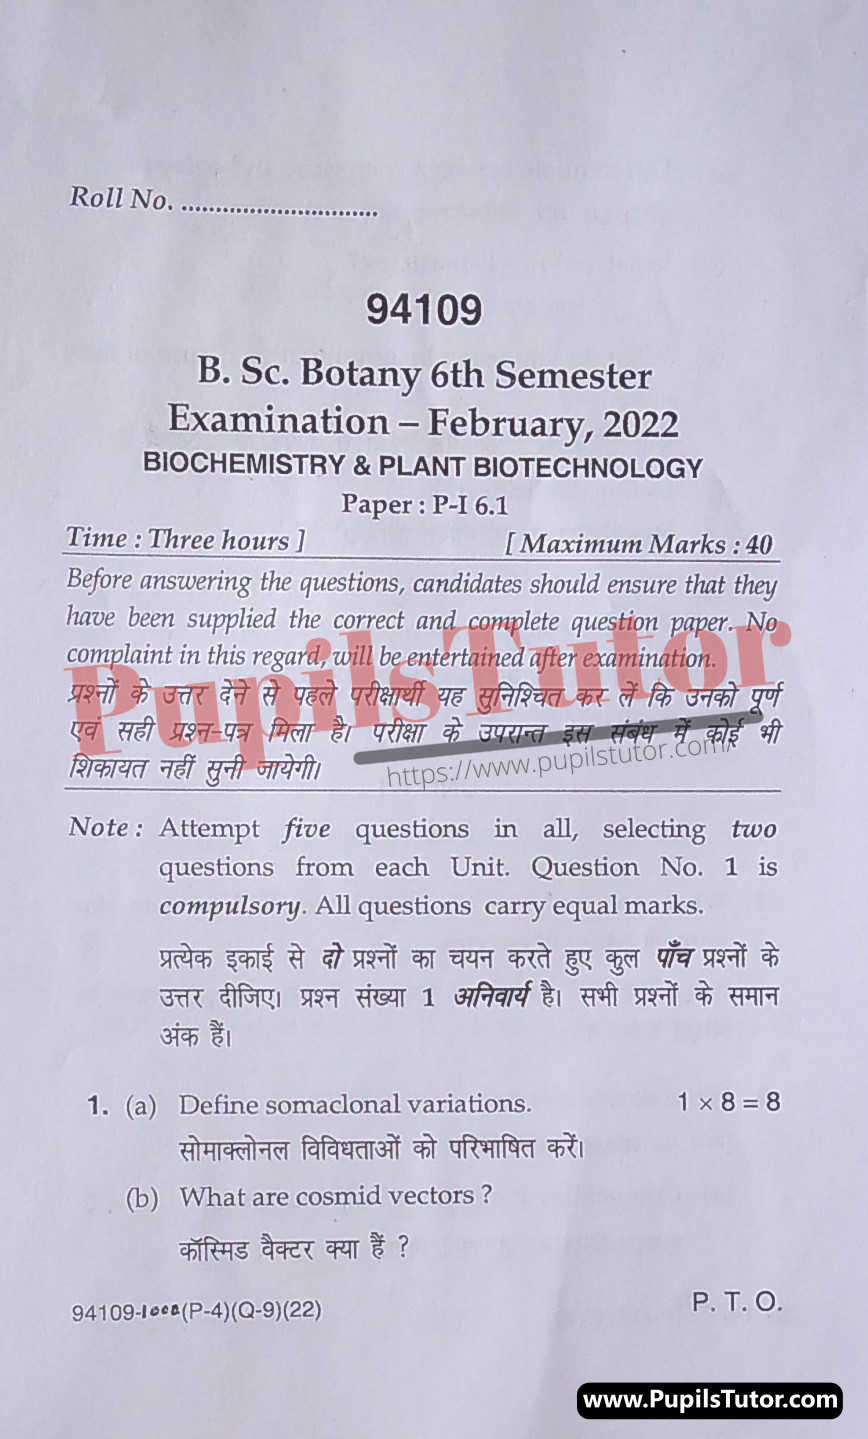 MDU (Maharshi Dayanand University, Rohtak Haryana) BSc Botany Latest Scheme Exam Sixth Semester Previous Year Biochemistry And Plant Biotechnology Question Paper For February, 2022 Exam (Question Paper Page 1) - pupilstutor.com